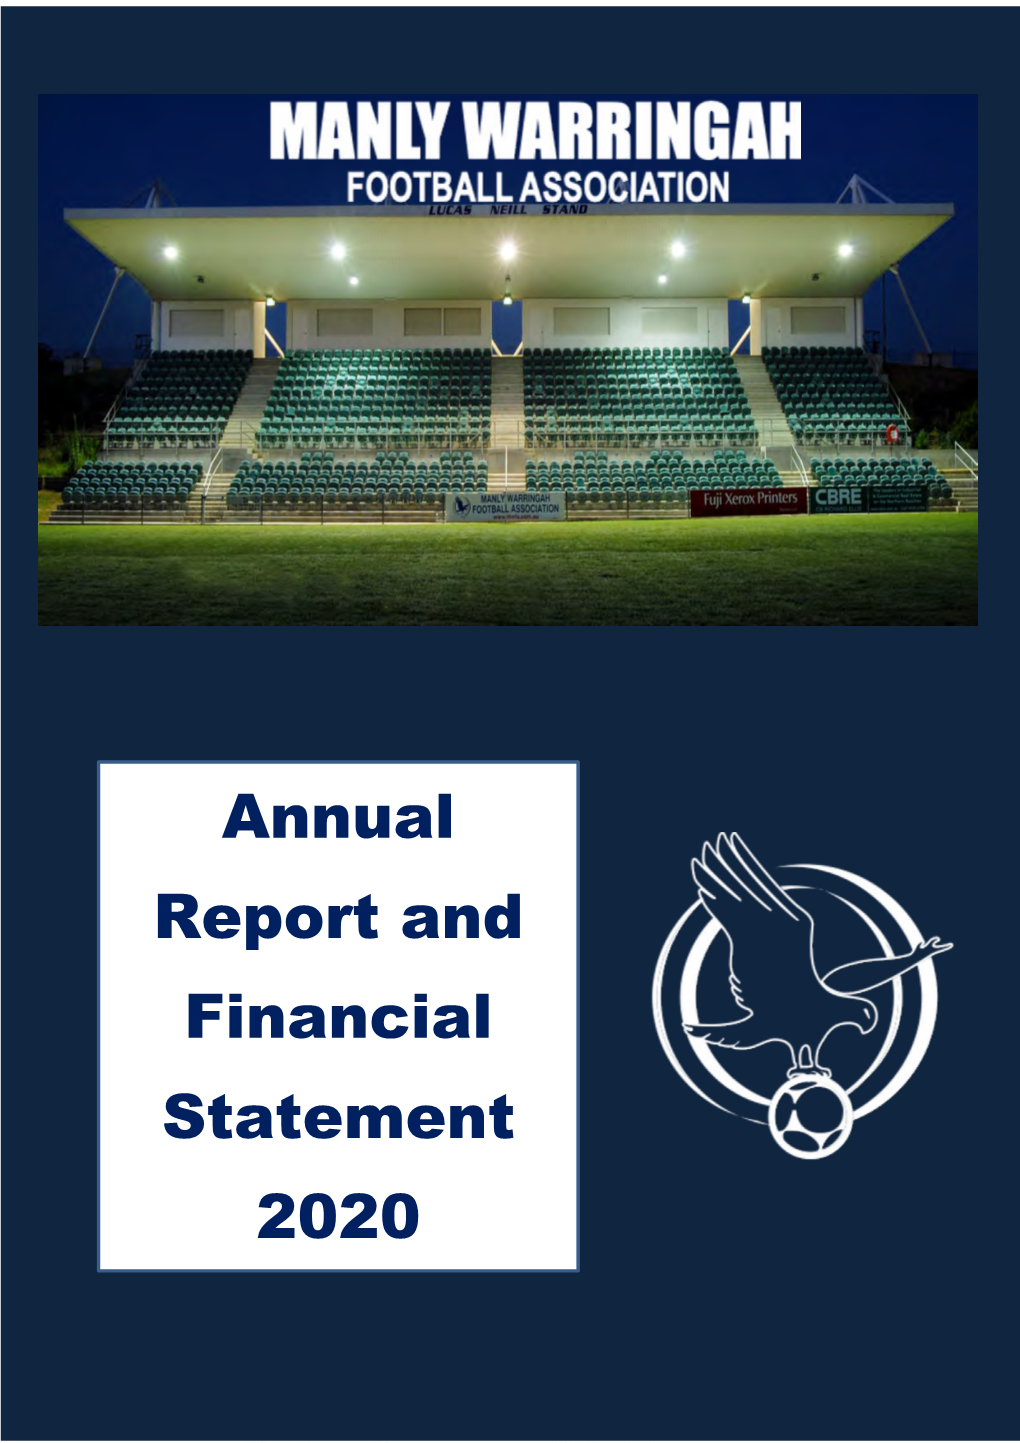 Annual Report and Financial Statement 2020